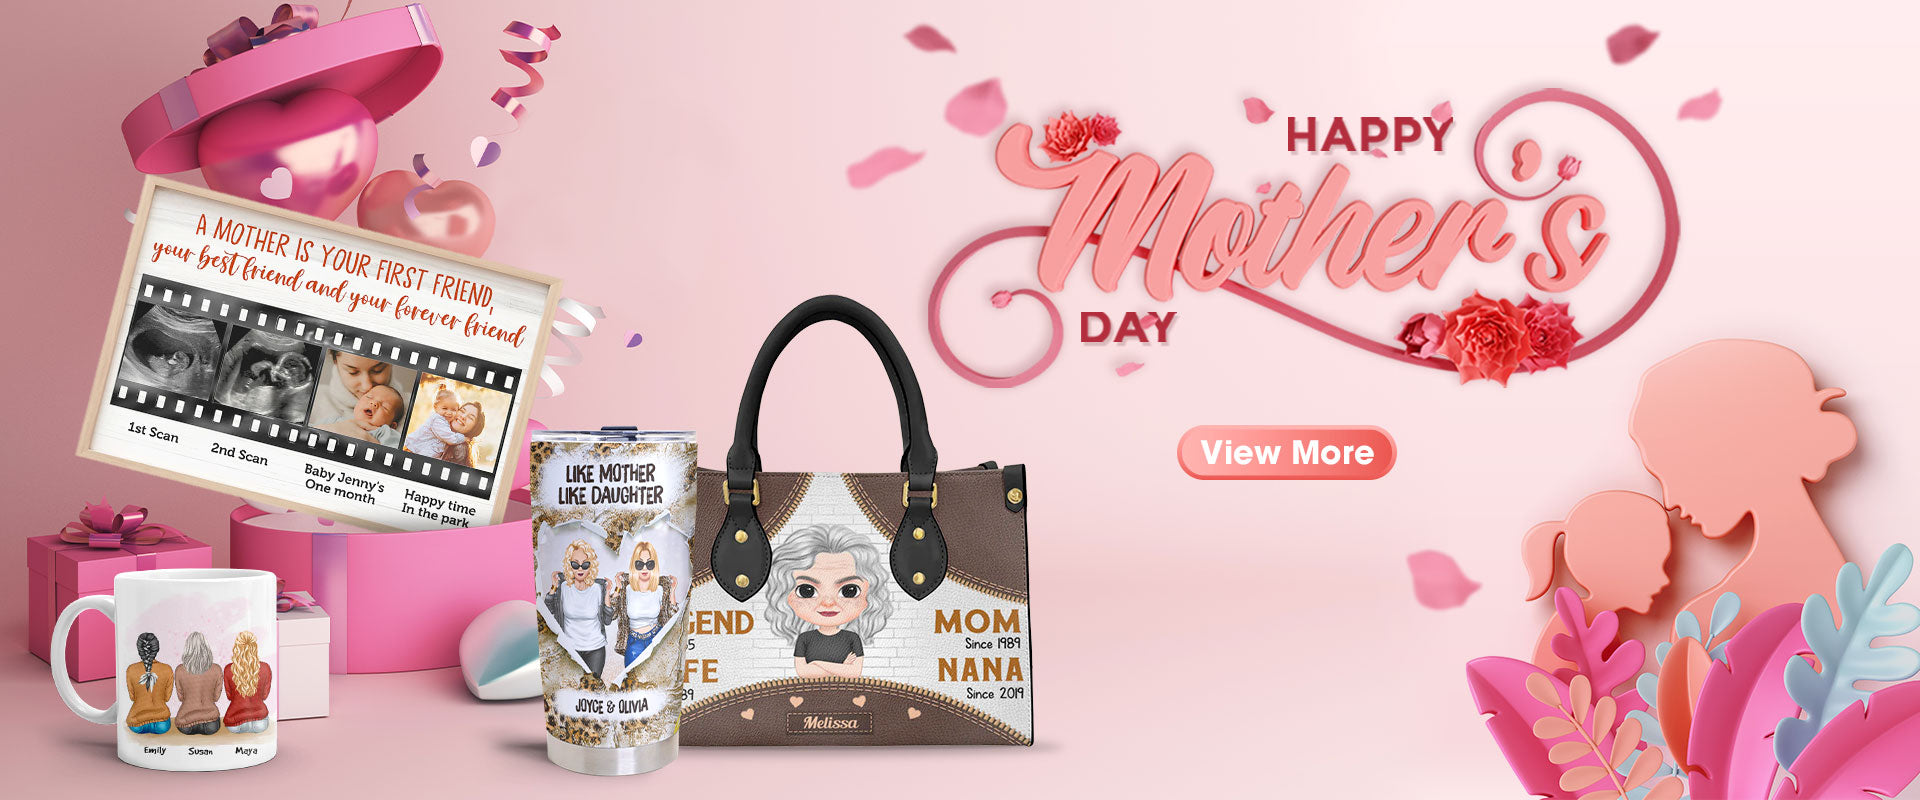 Give Mom a Thoughtful and Personalized Gift this Mother's Day！